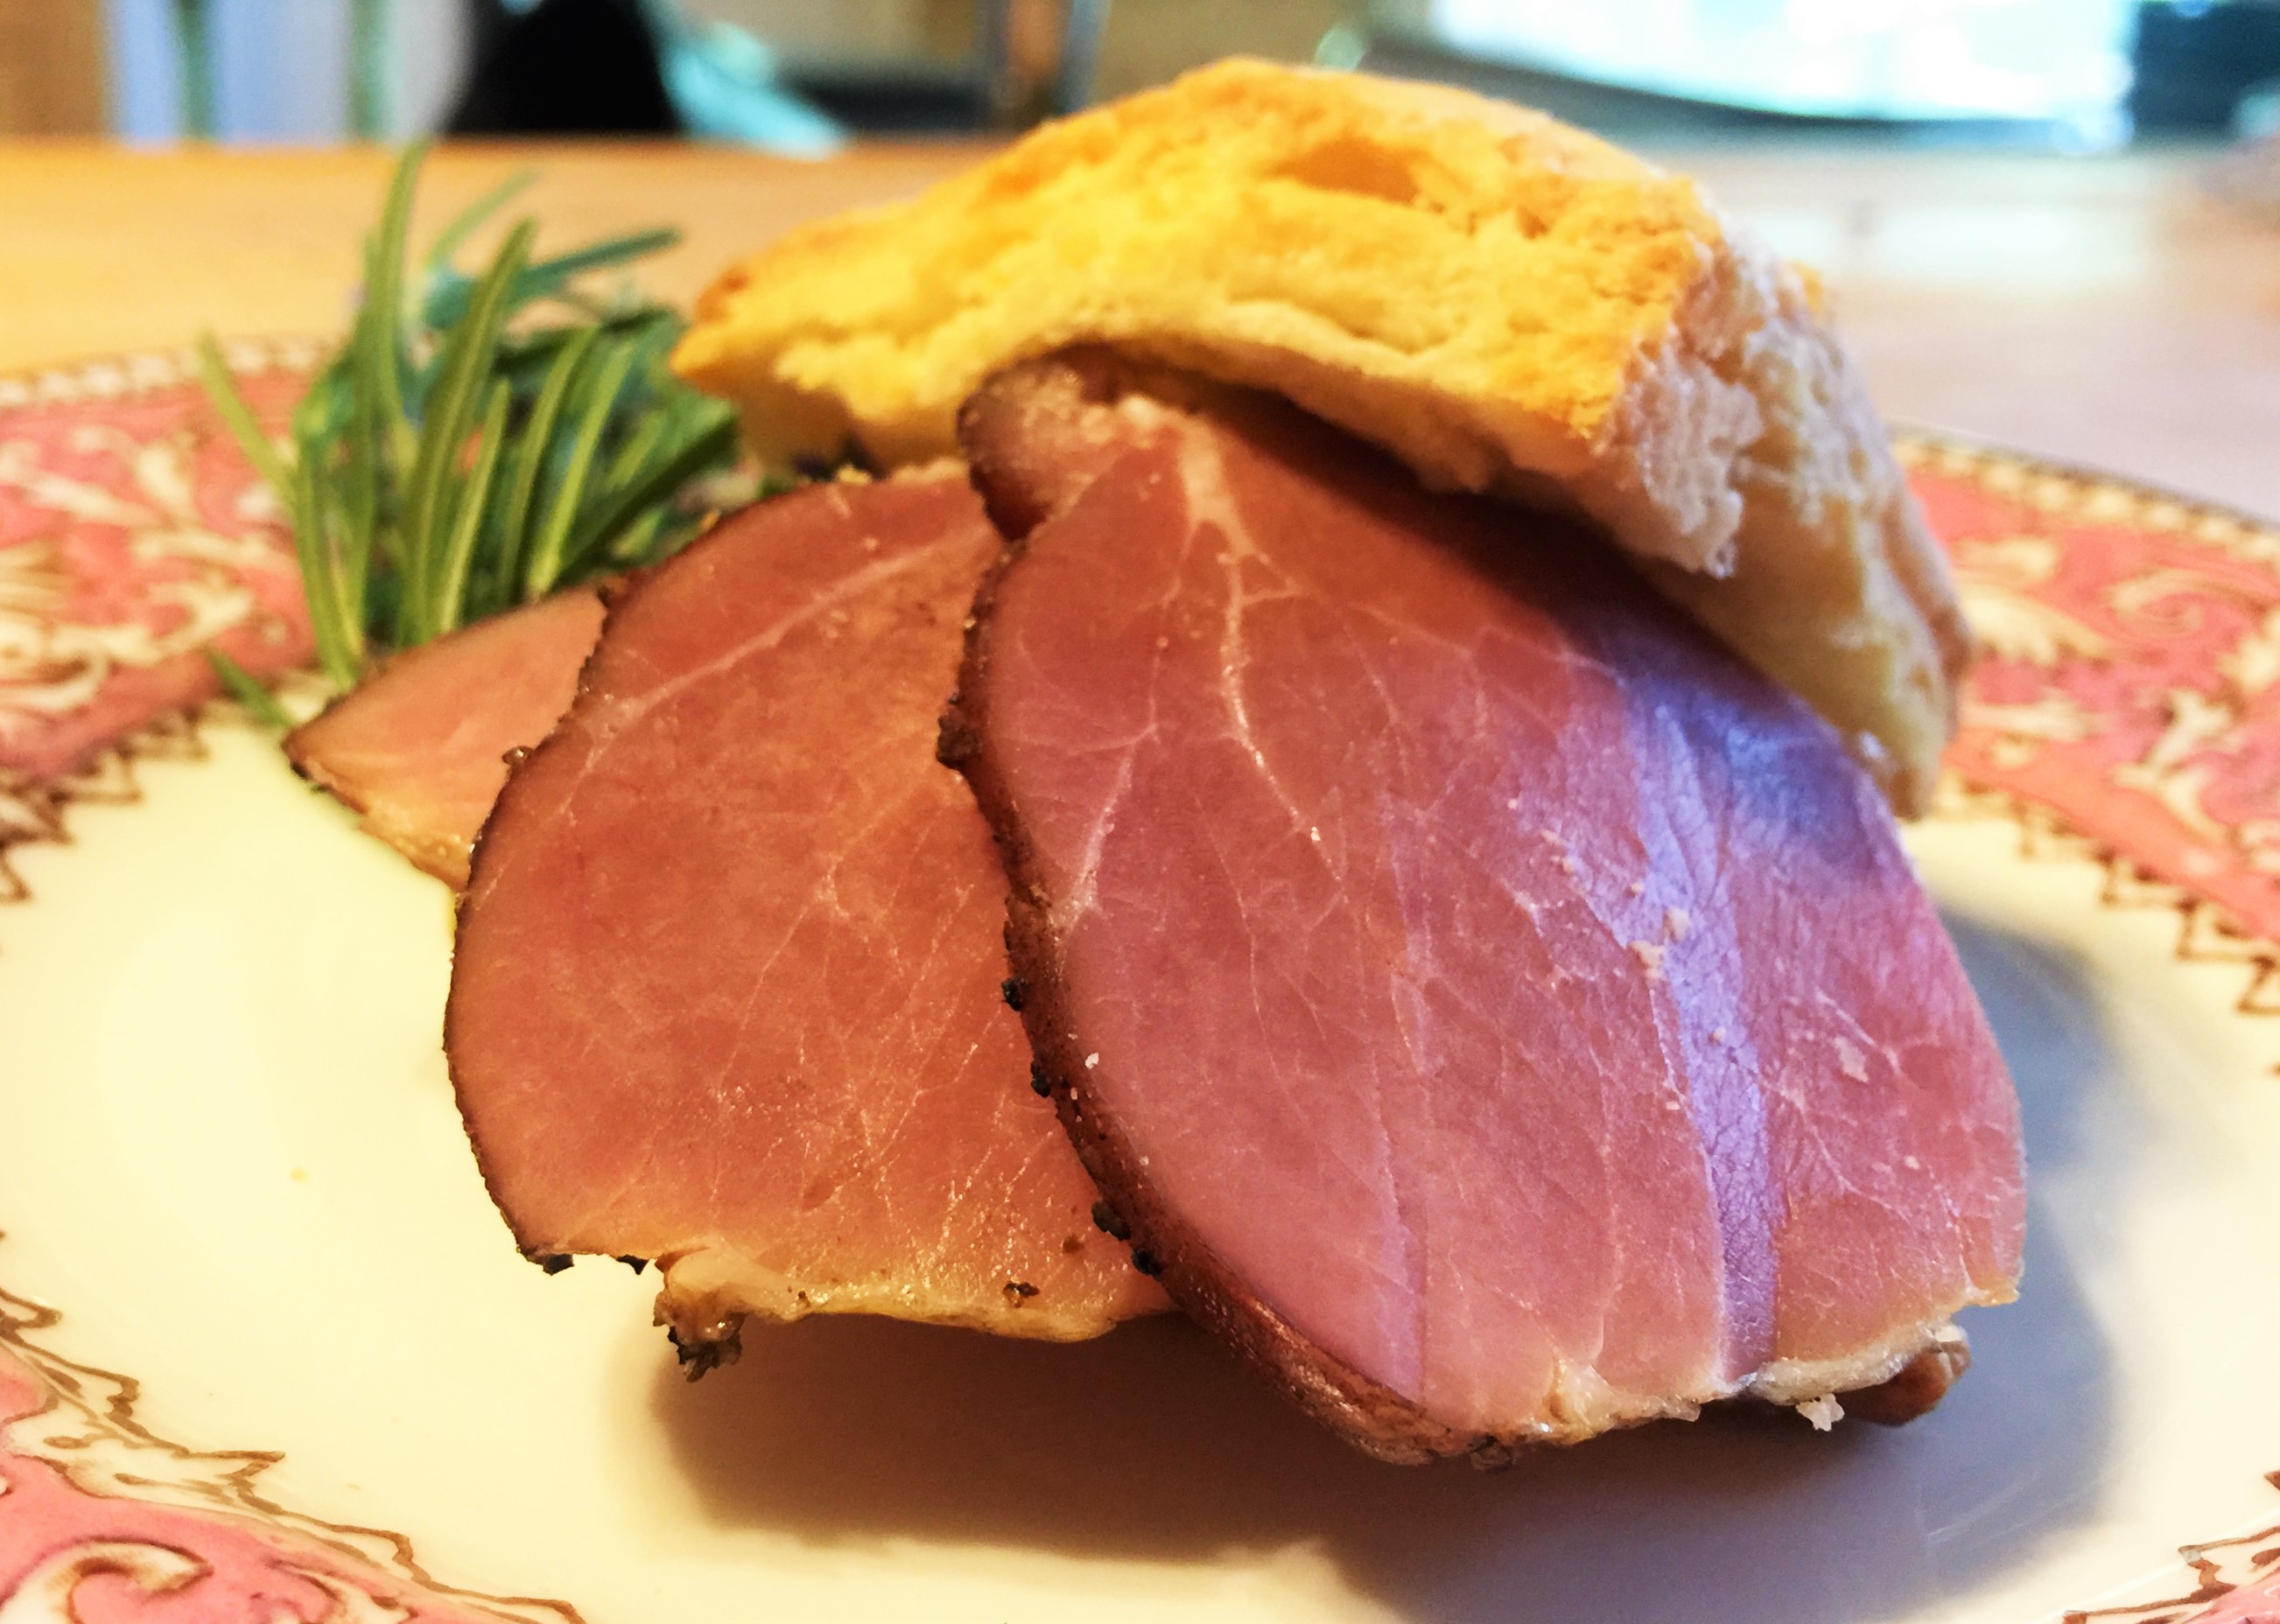 Heritage pork ham on one of Jon's famous biscuits